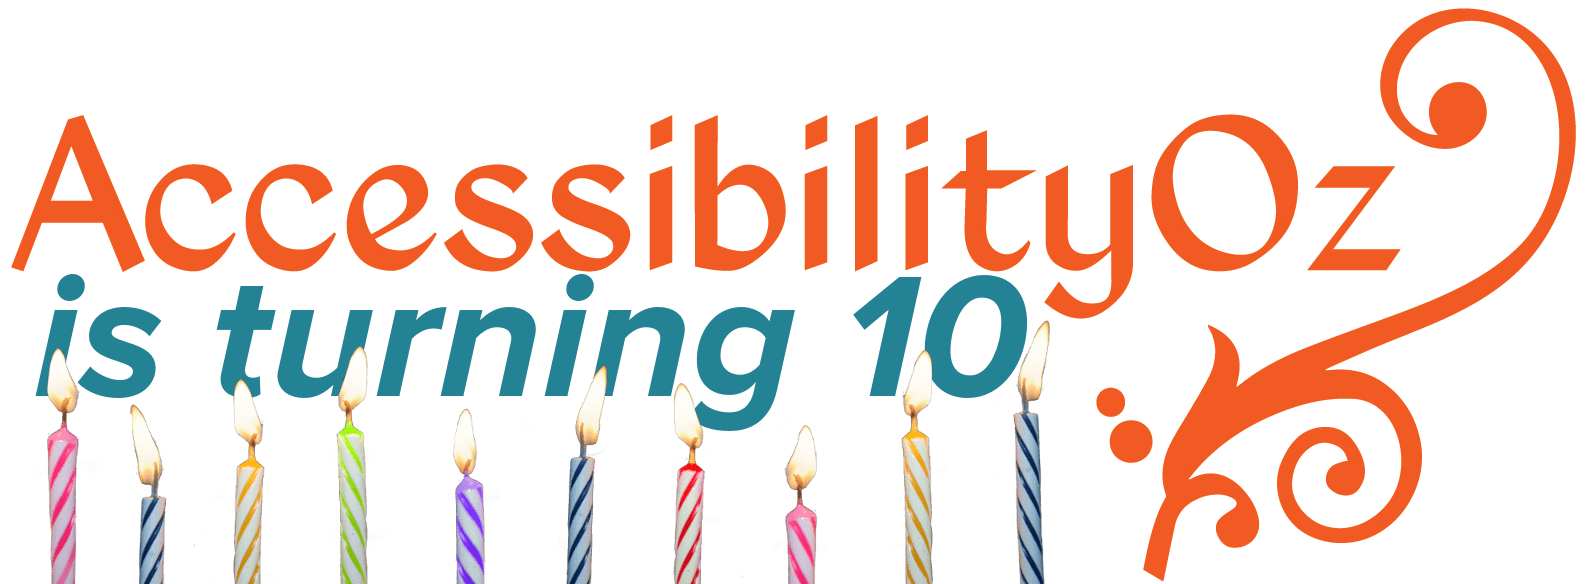 AccessibilityOz is turning 10